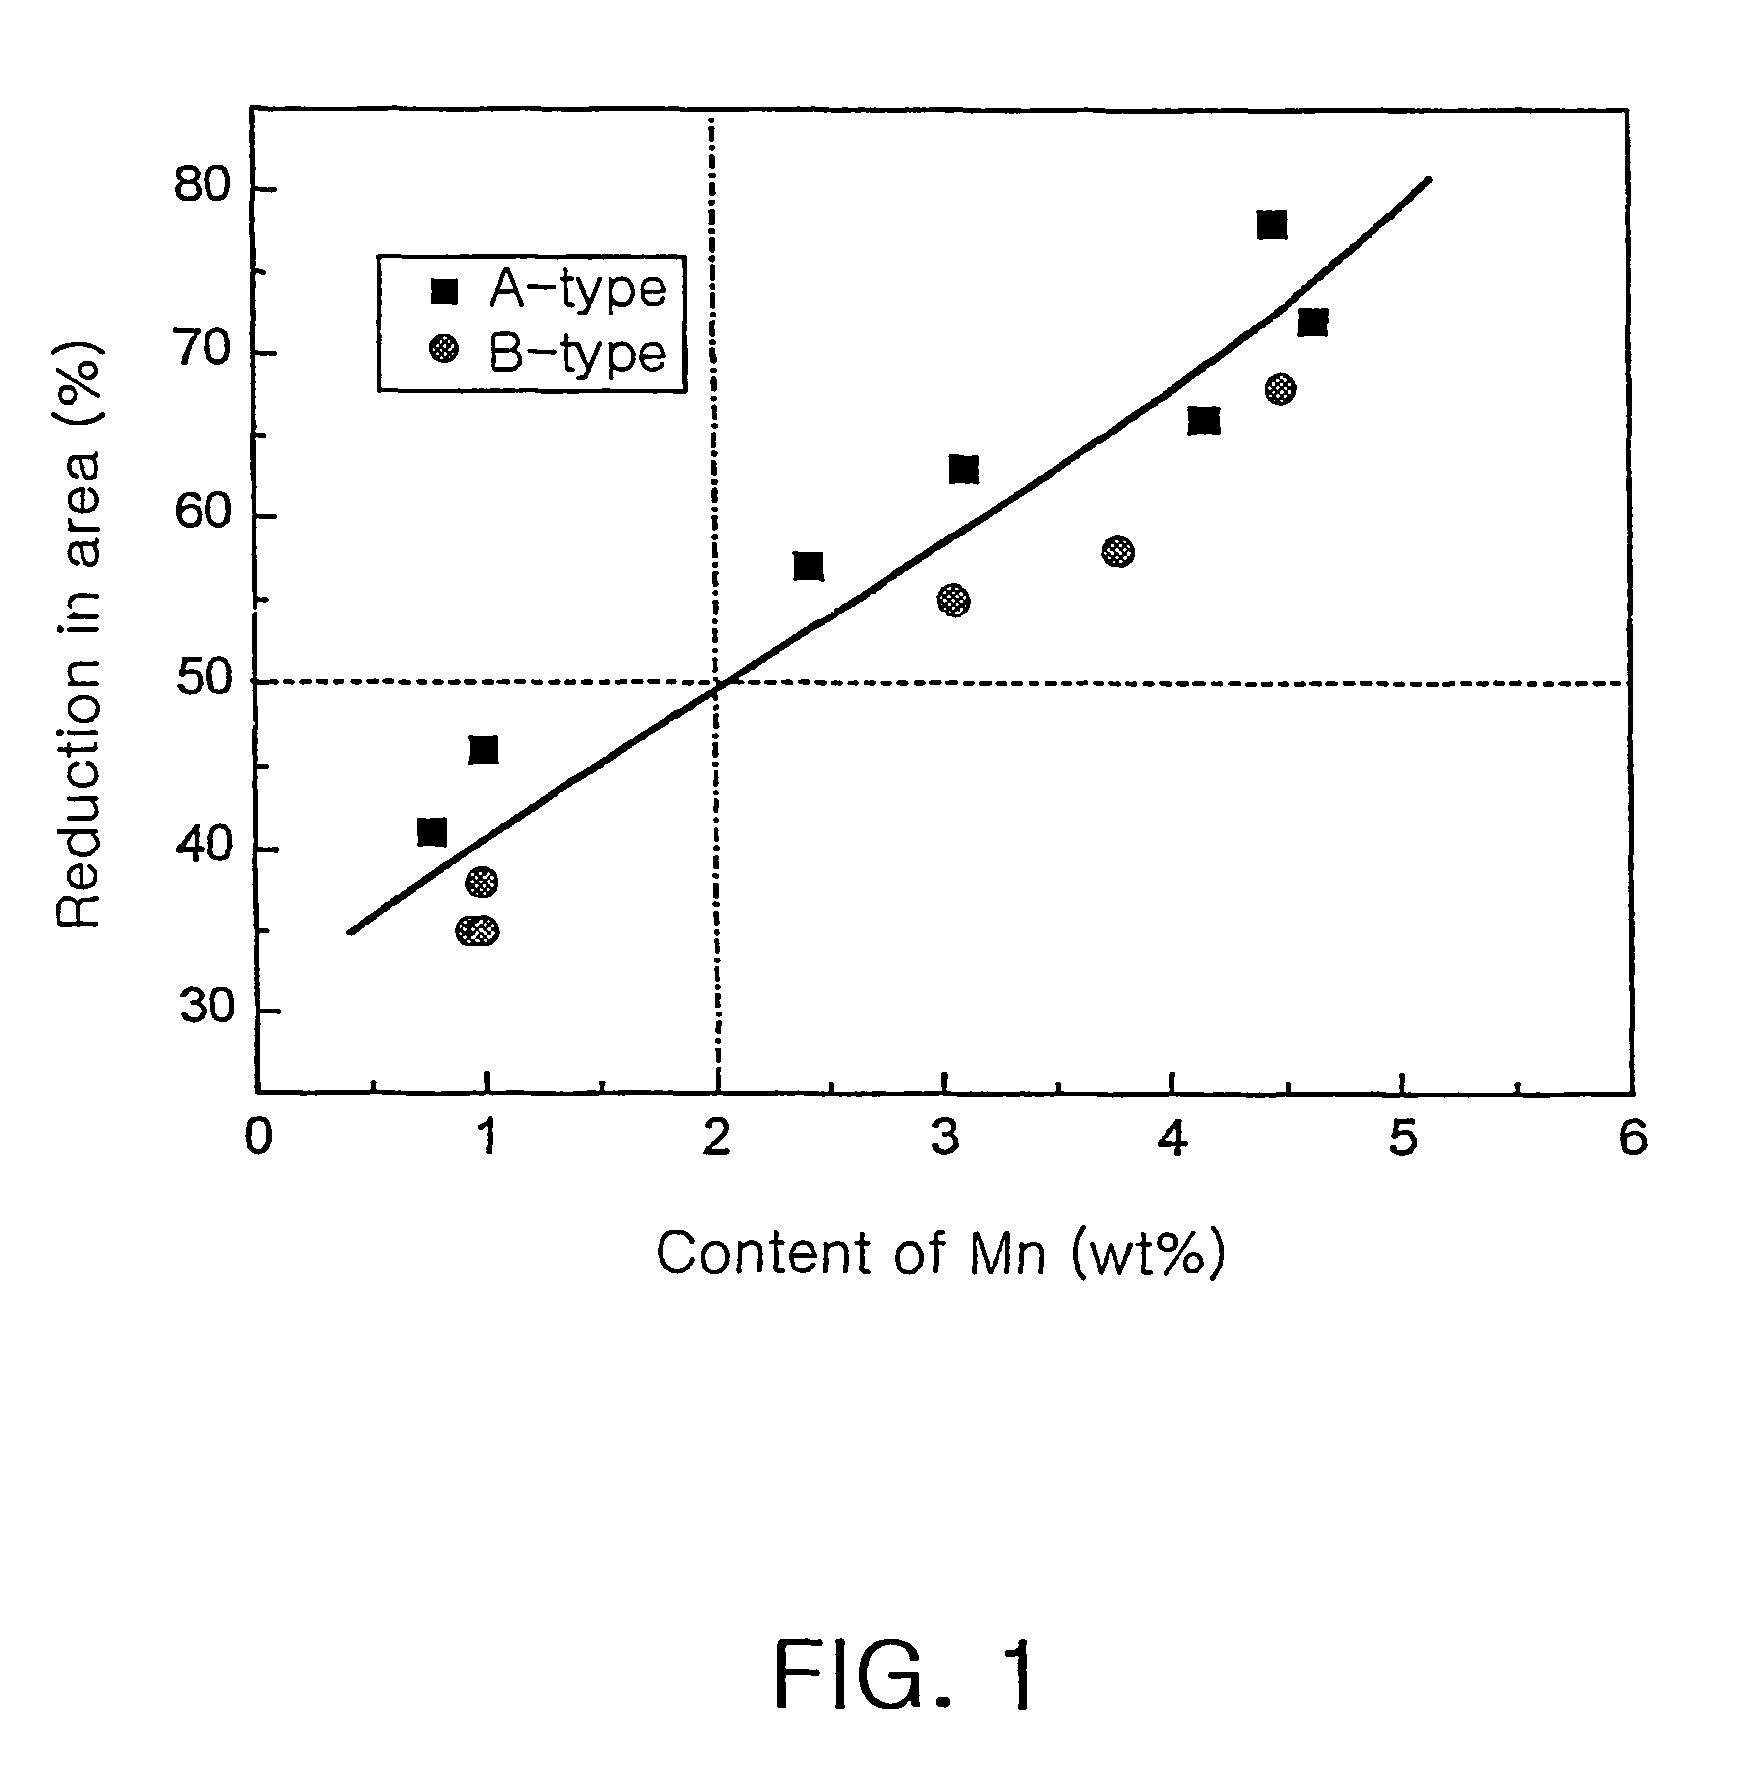 High manganese duplex stainless steel having superior hot workabilities and method for manufacturing thereof